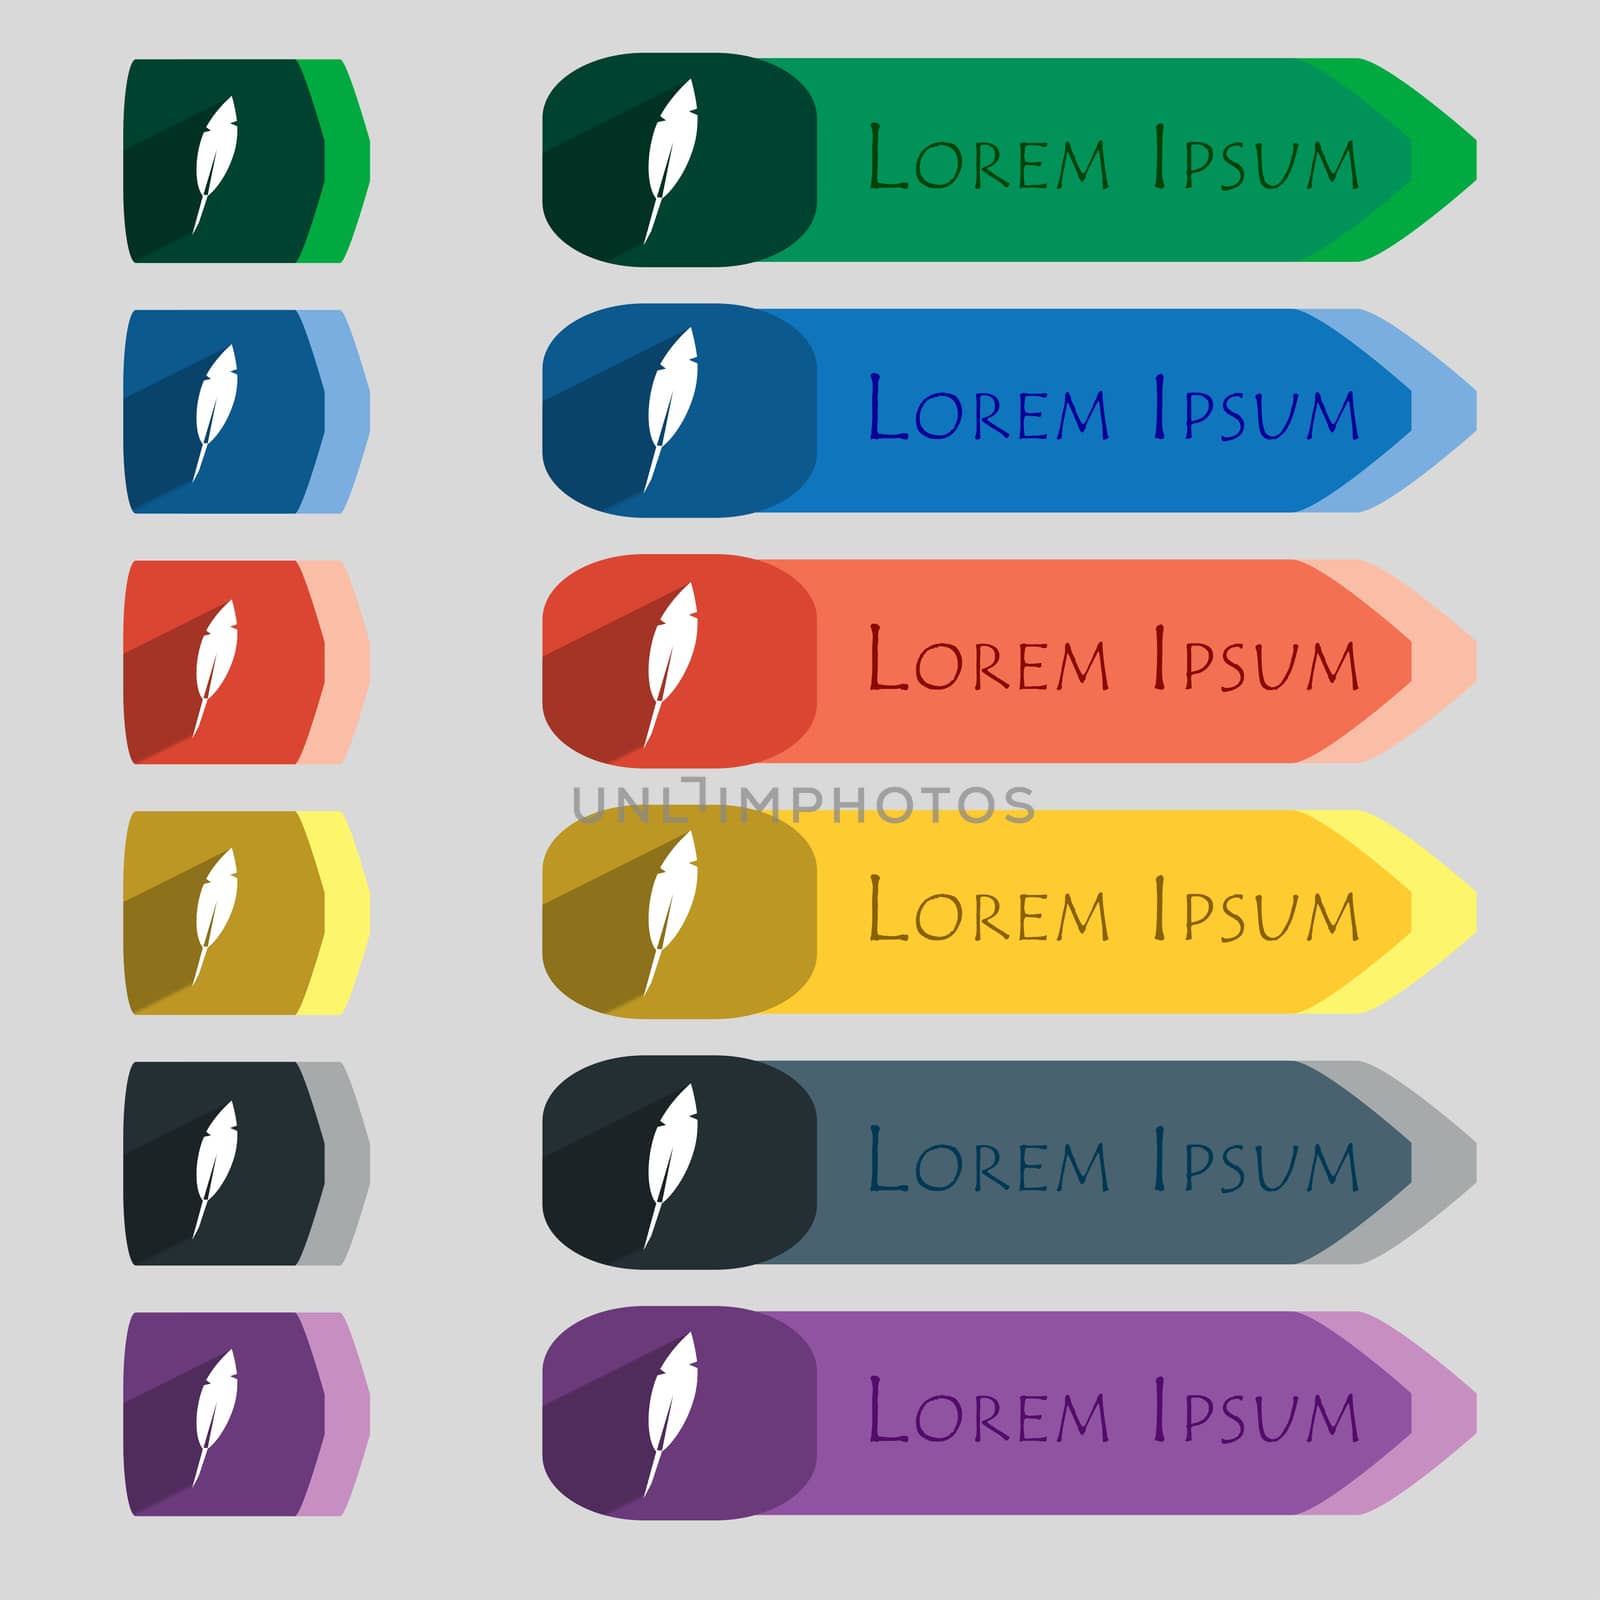 Feather sign icon. Retro pen symbol. Set of colored buttons illustration